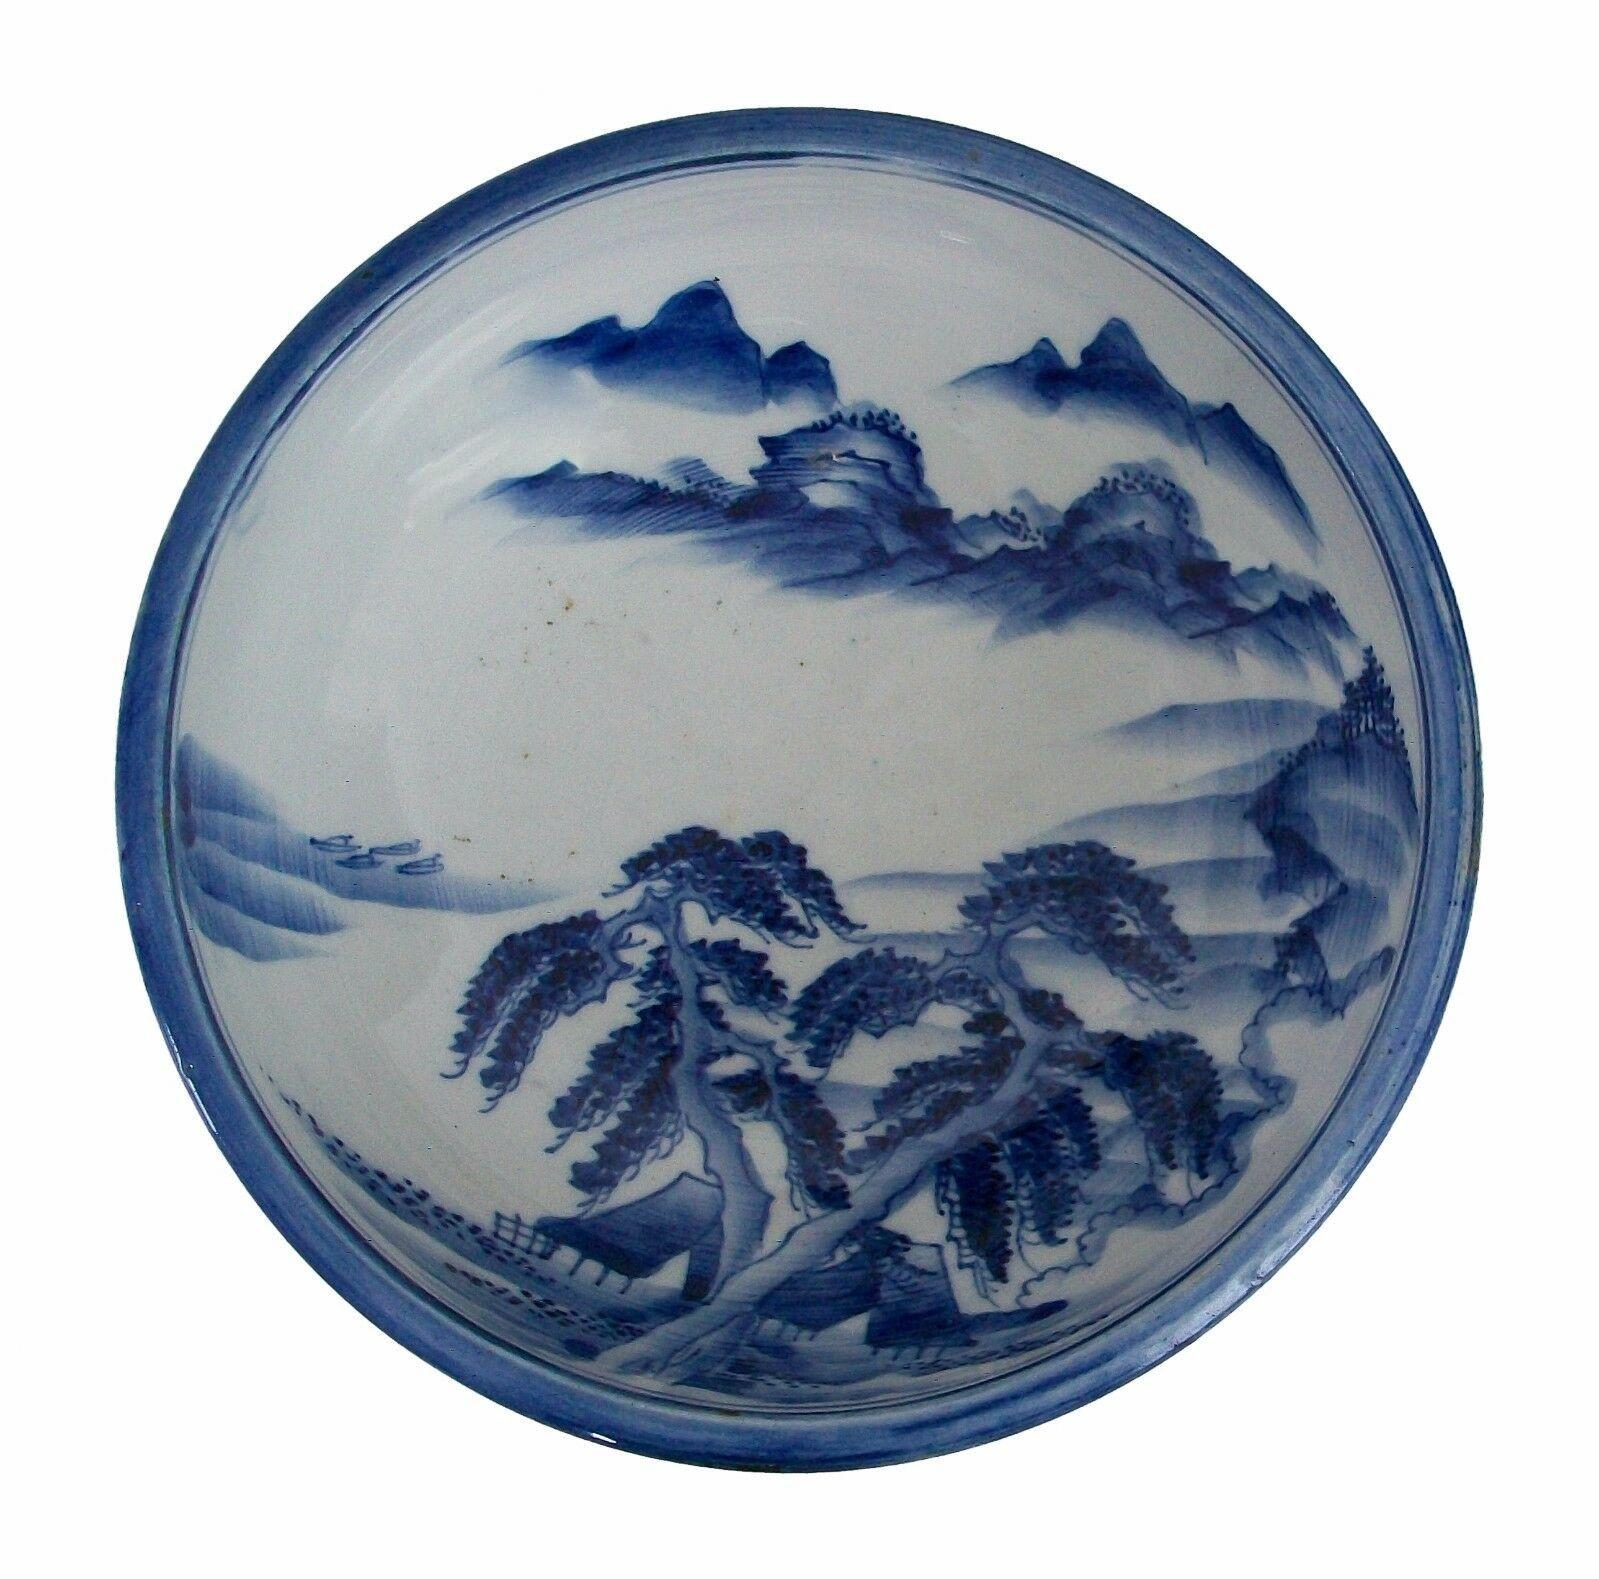 Vintage blue and white bowl - hand painted mountain views with trees - signed - Japan - mid 20th century.

Excellent vintage condition - no loss - no damage - no restoration - glaze abrasions and scratches to the inner bowl from age and